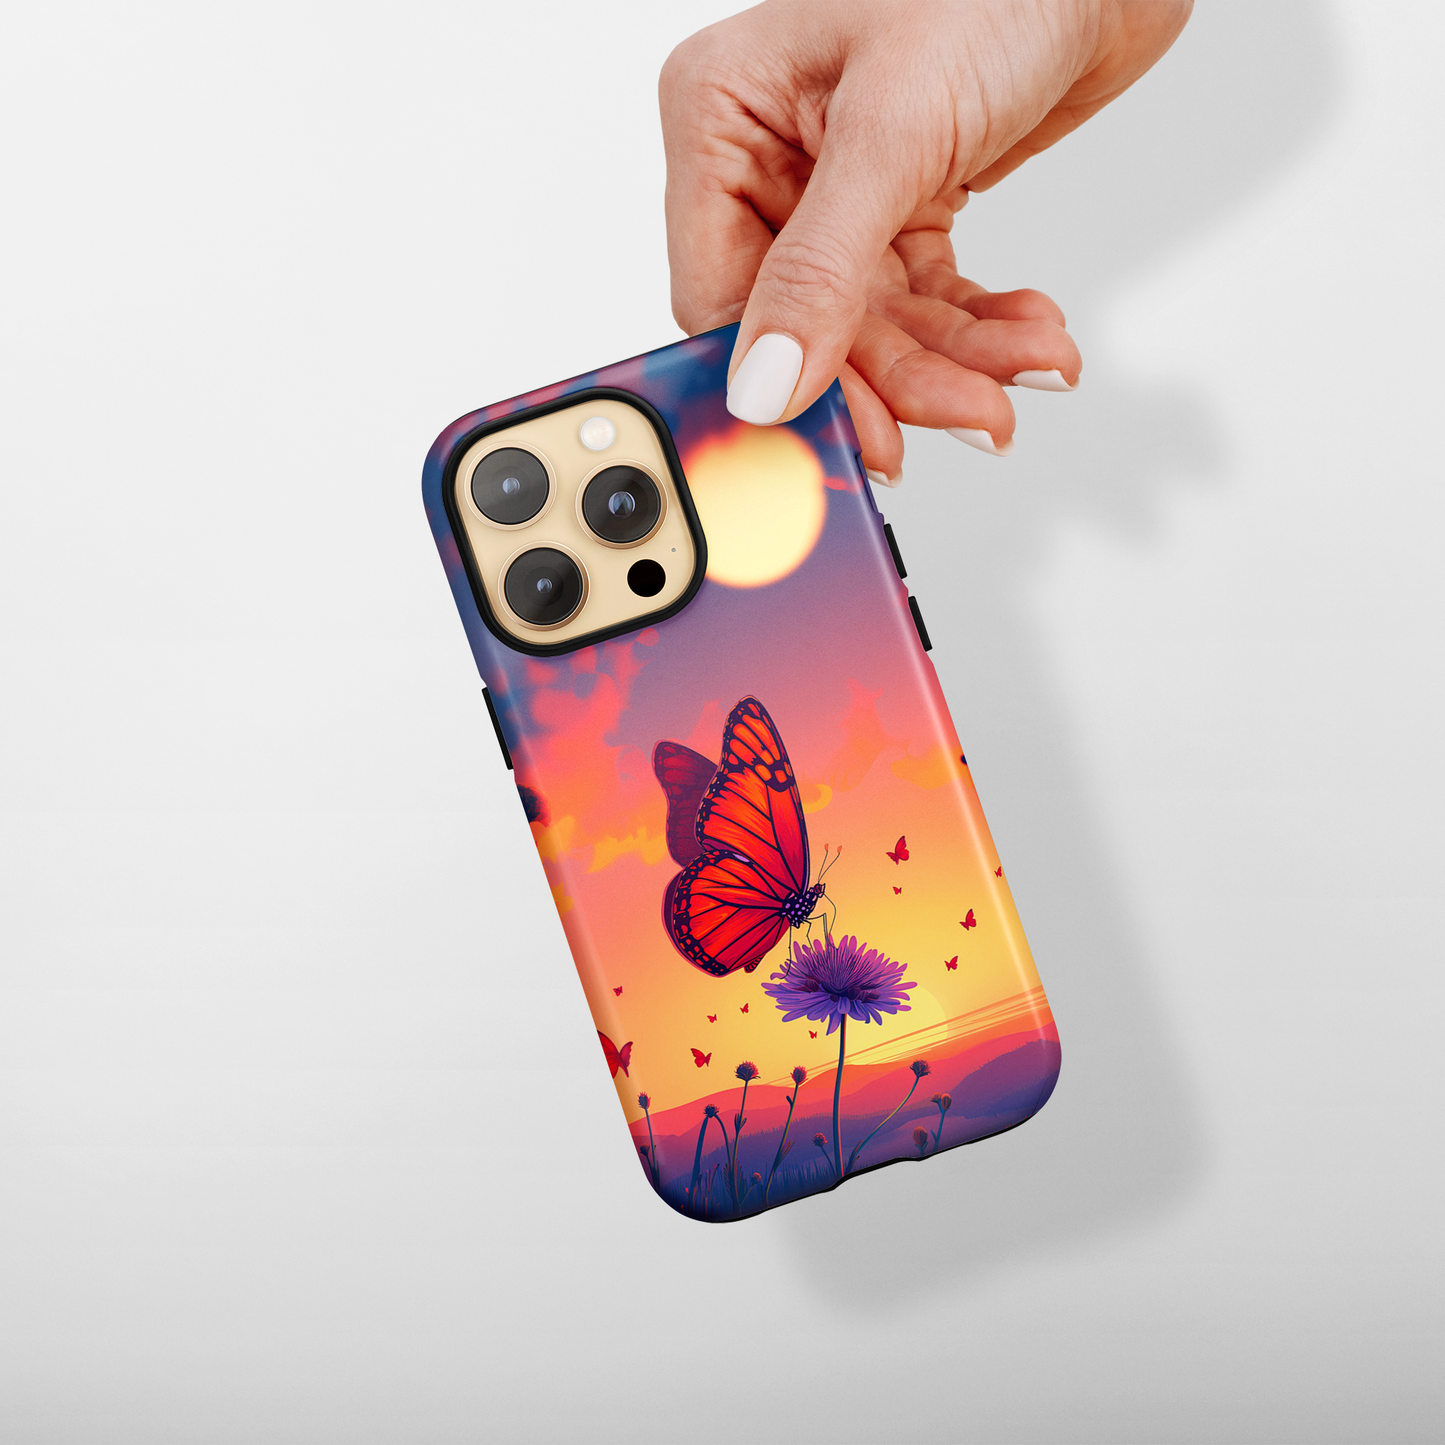 Glowing Flight (iPhone Case 11-15)Discover the perfect balance of style and safety with RIMA's Tough Phone Case for iPhone 11, 12, 13, 14, &amp; 15. Enjoy enhanced protection with a stylish glossy fiRimaGallery